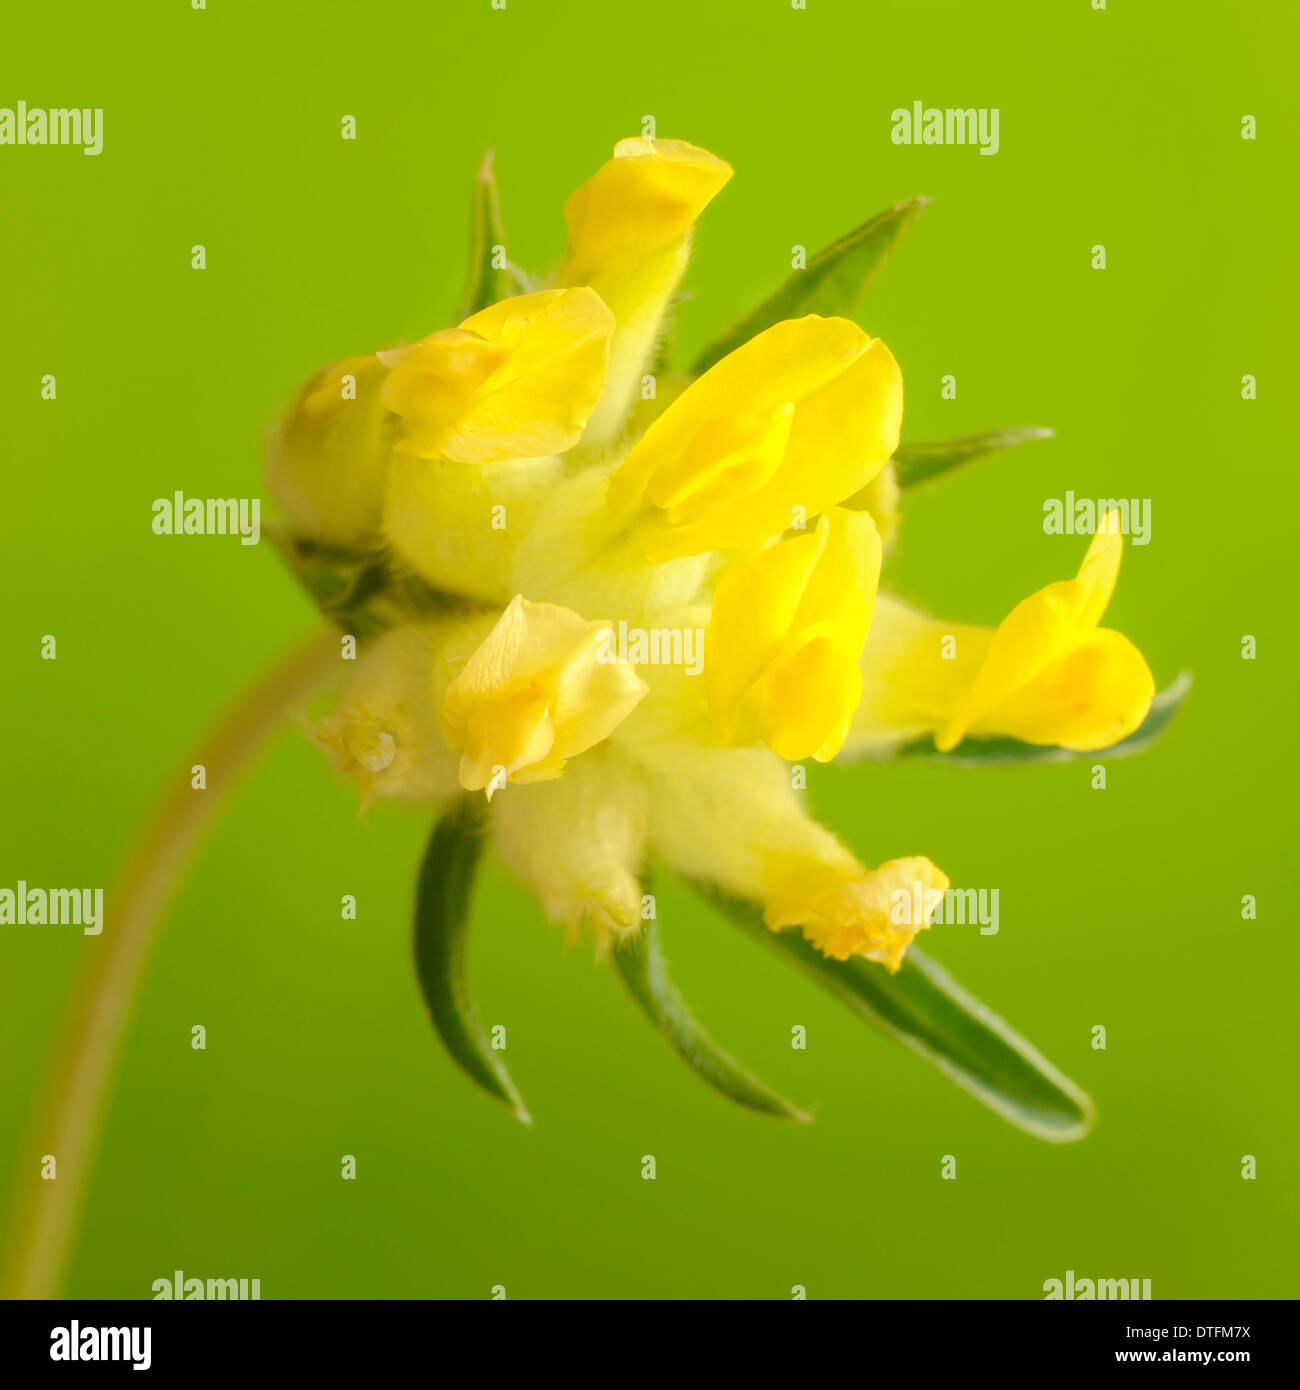 Common kidneyvetch, Anthyllis vulneraria, portrait of yellow flowers with nice outfocus background. Stock Photo